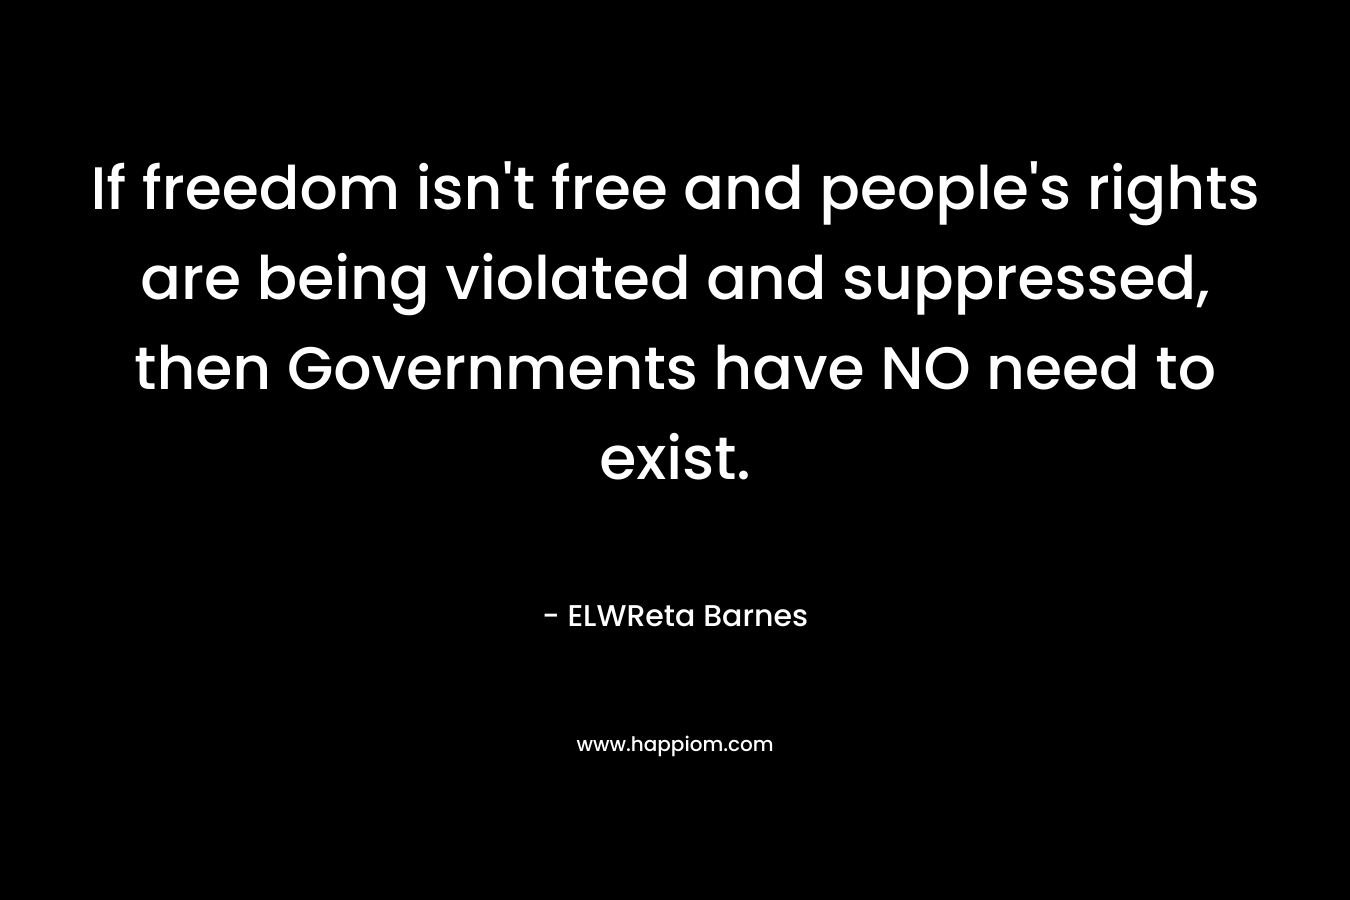 If freedom isn’t free and people’s rights are being violated and suppressed, then Governments have NO need to exist. – ELWReta Barnes